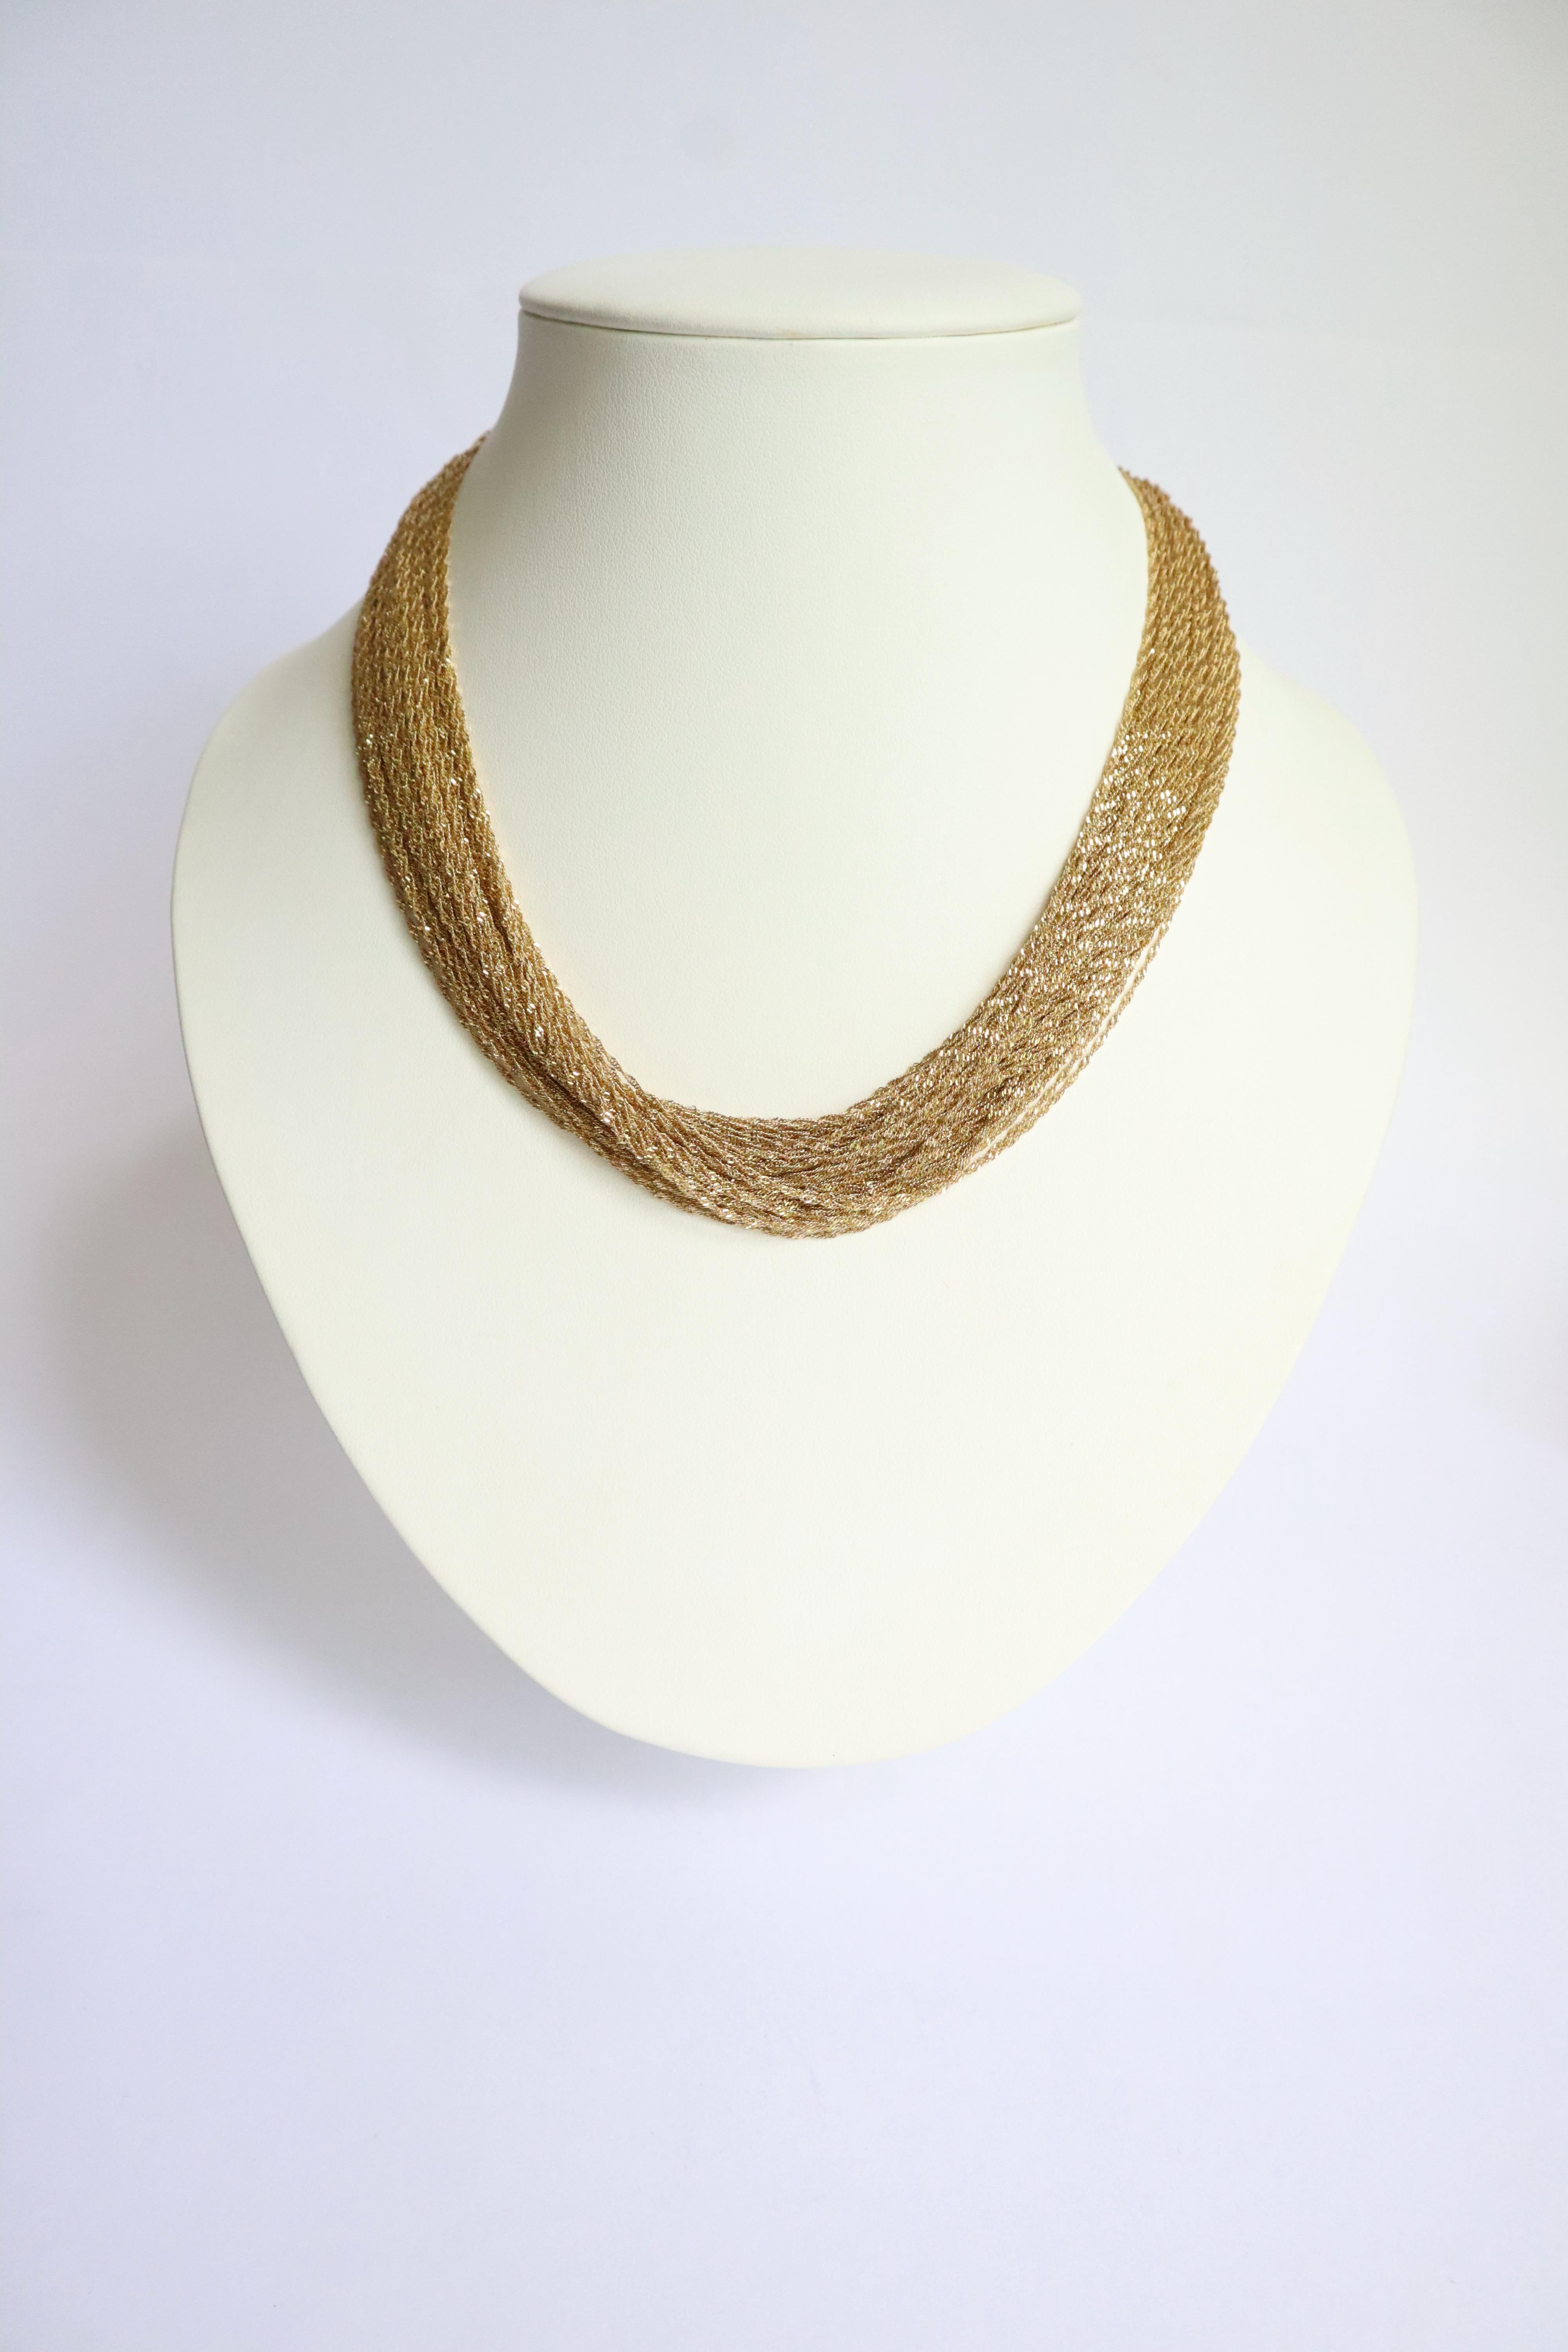 18 kt gold multi-wire necklace. It is made up of 74 chains of twisted gold threads. Tab clasp with safety figure eight. 
It is possible to wear it curled so it is shorter or not curled so it is longer. Please see on the pictures.
Eagle head hallmark